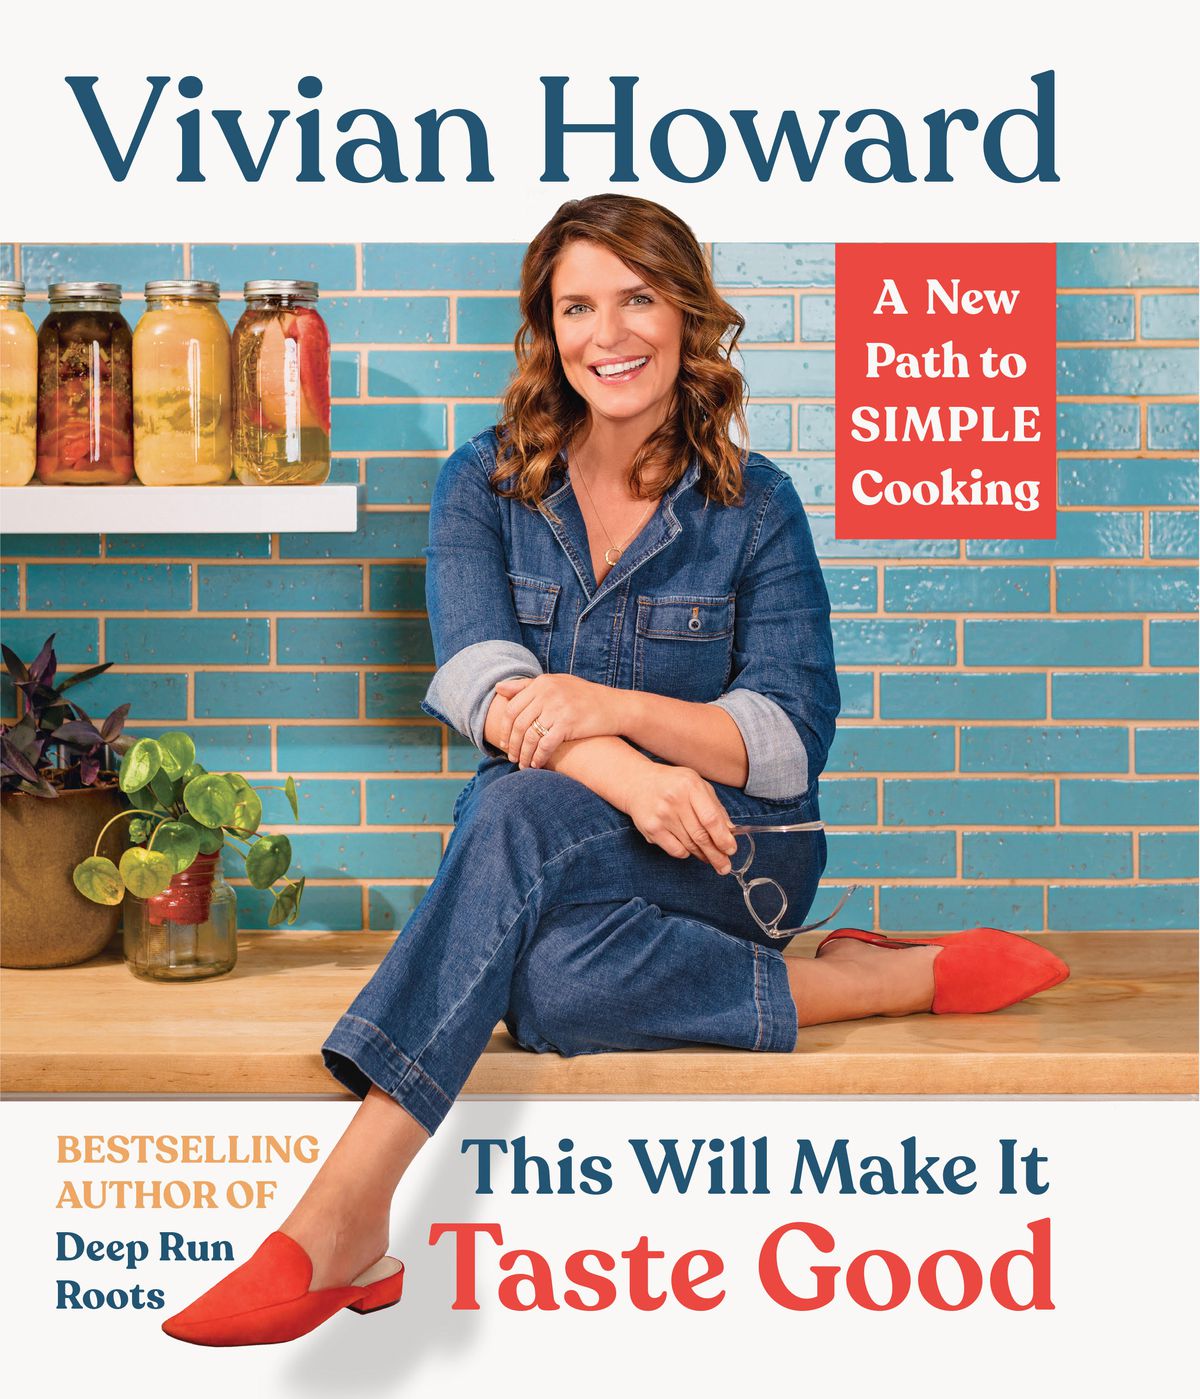 Vivian Howard sitting on a kitchen counter on the cover of This Will Make it Taste Good